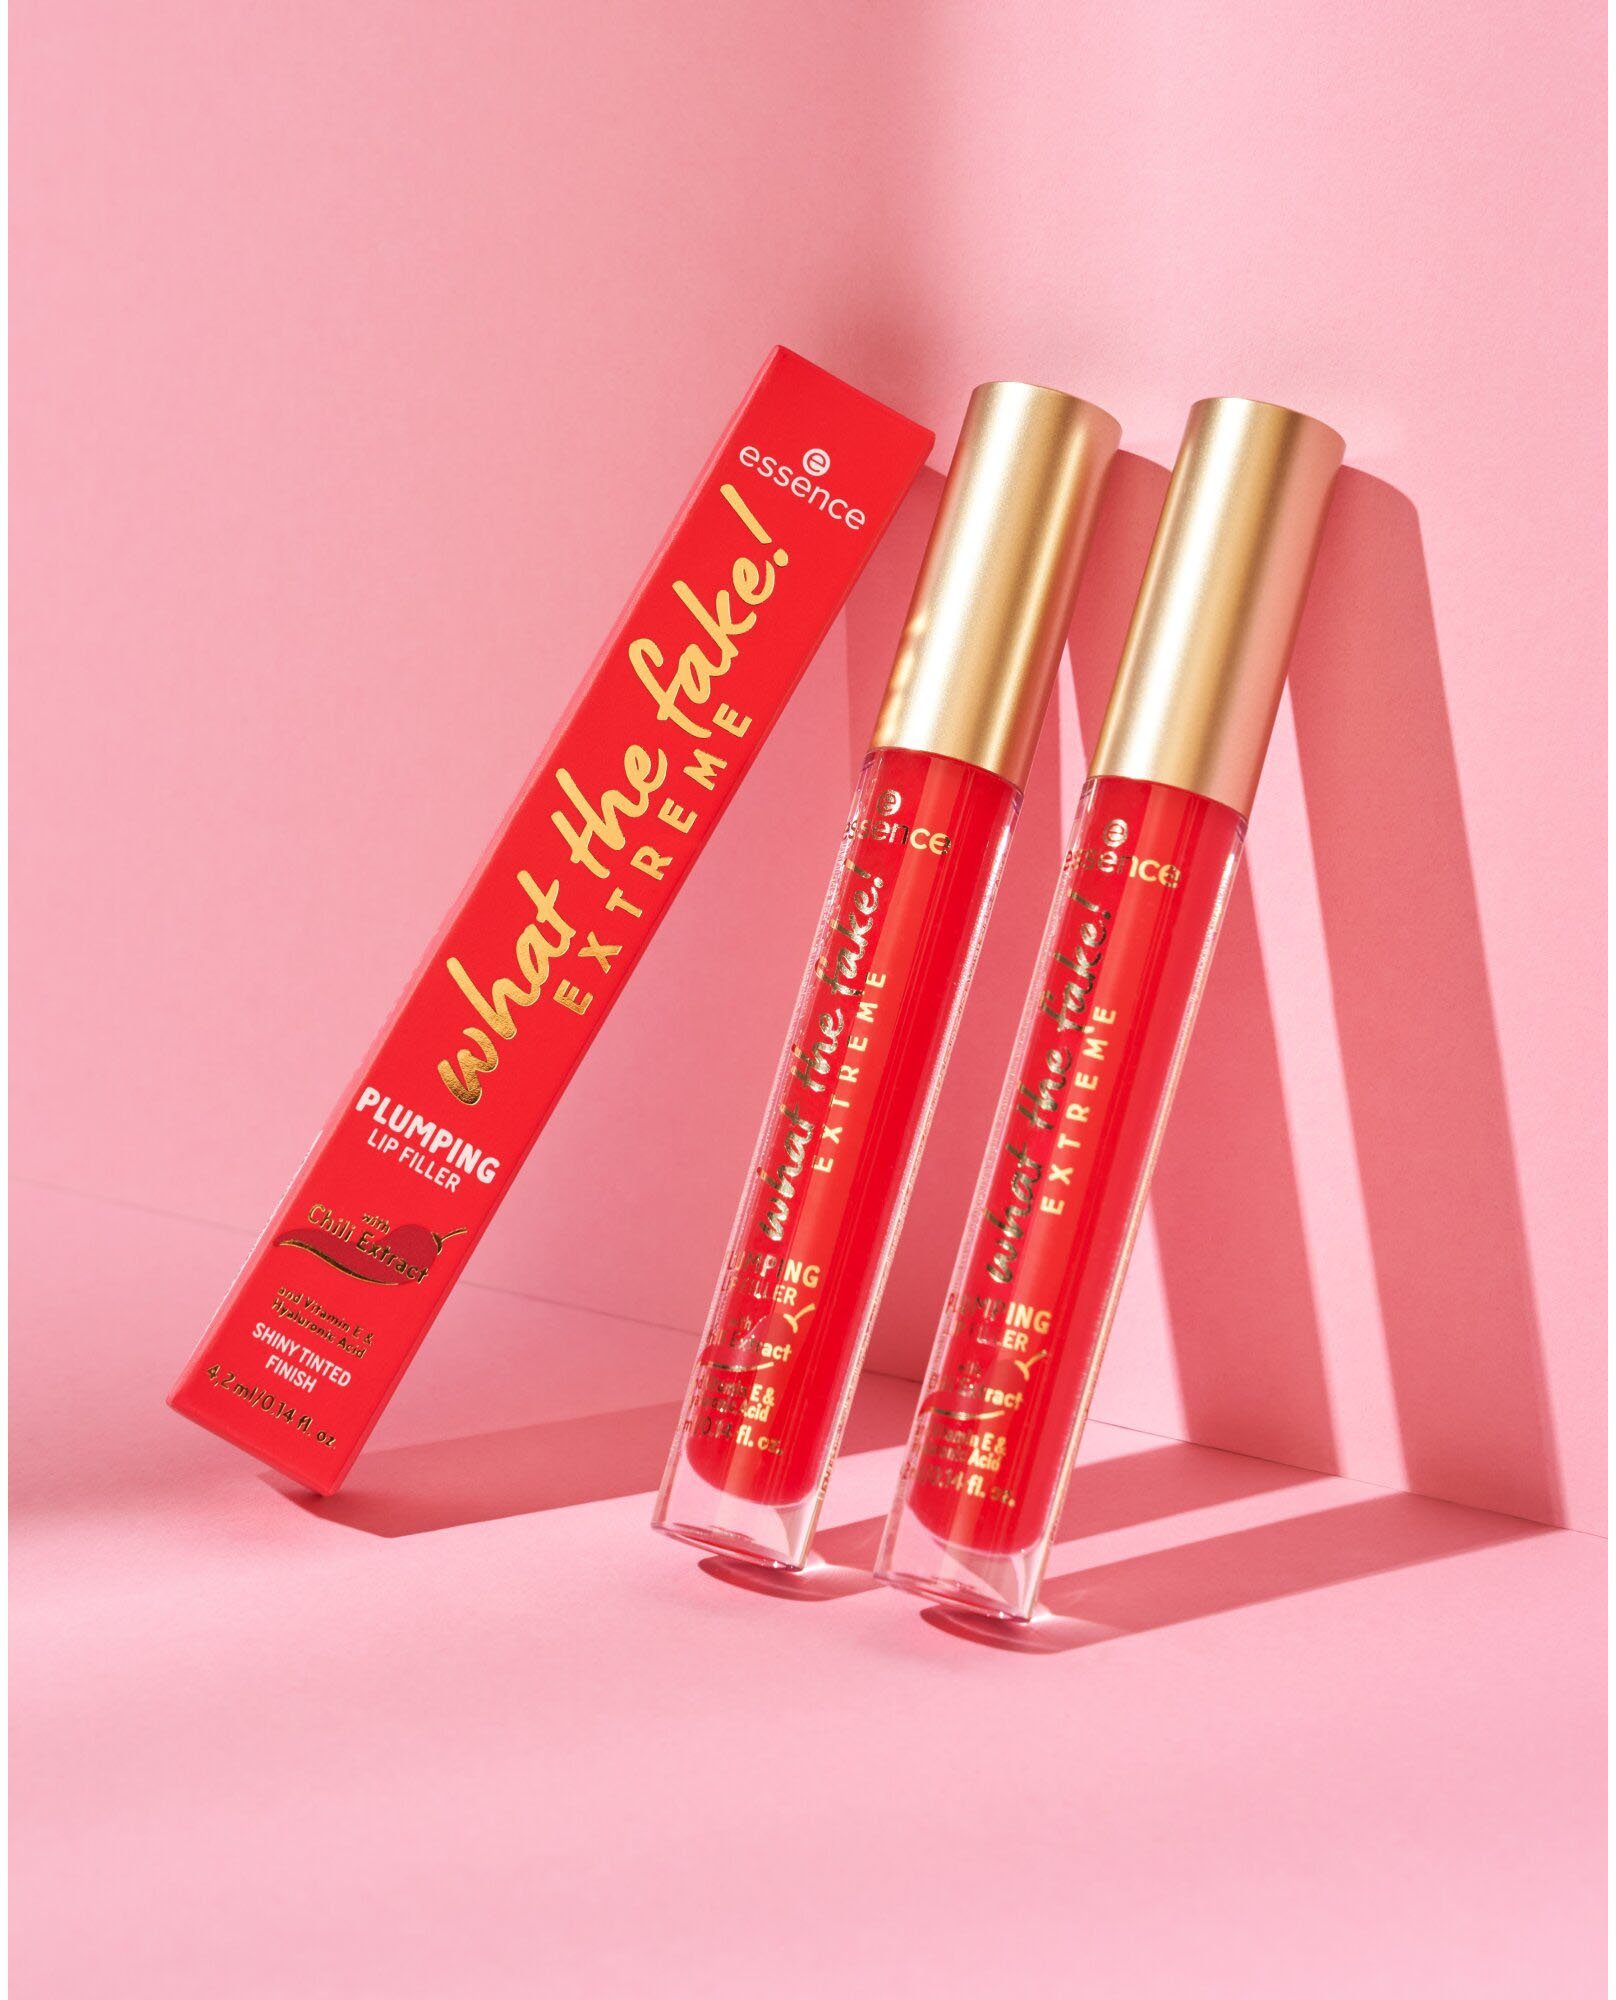 PLUMPING what FILLER, the Lip-Booster Essence fake! LIP EXTREME 3-tlg.